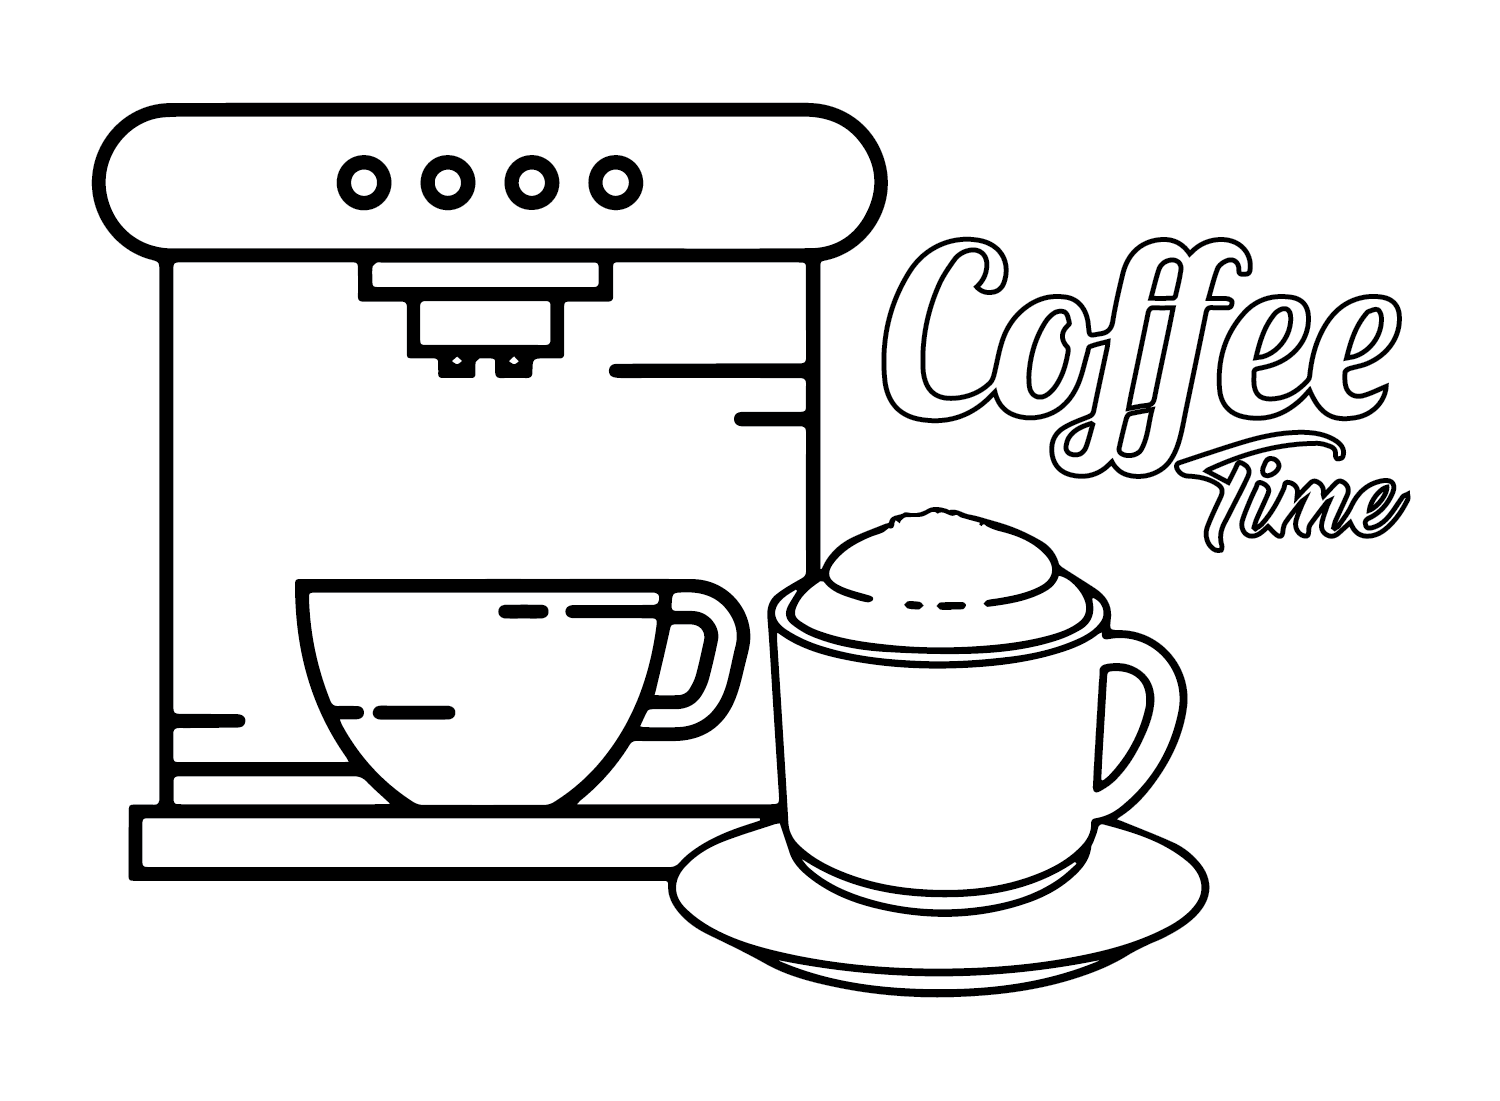 Coffee Maker from Coffee